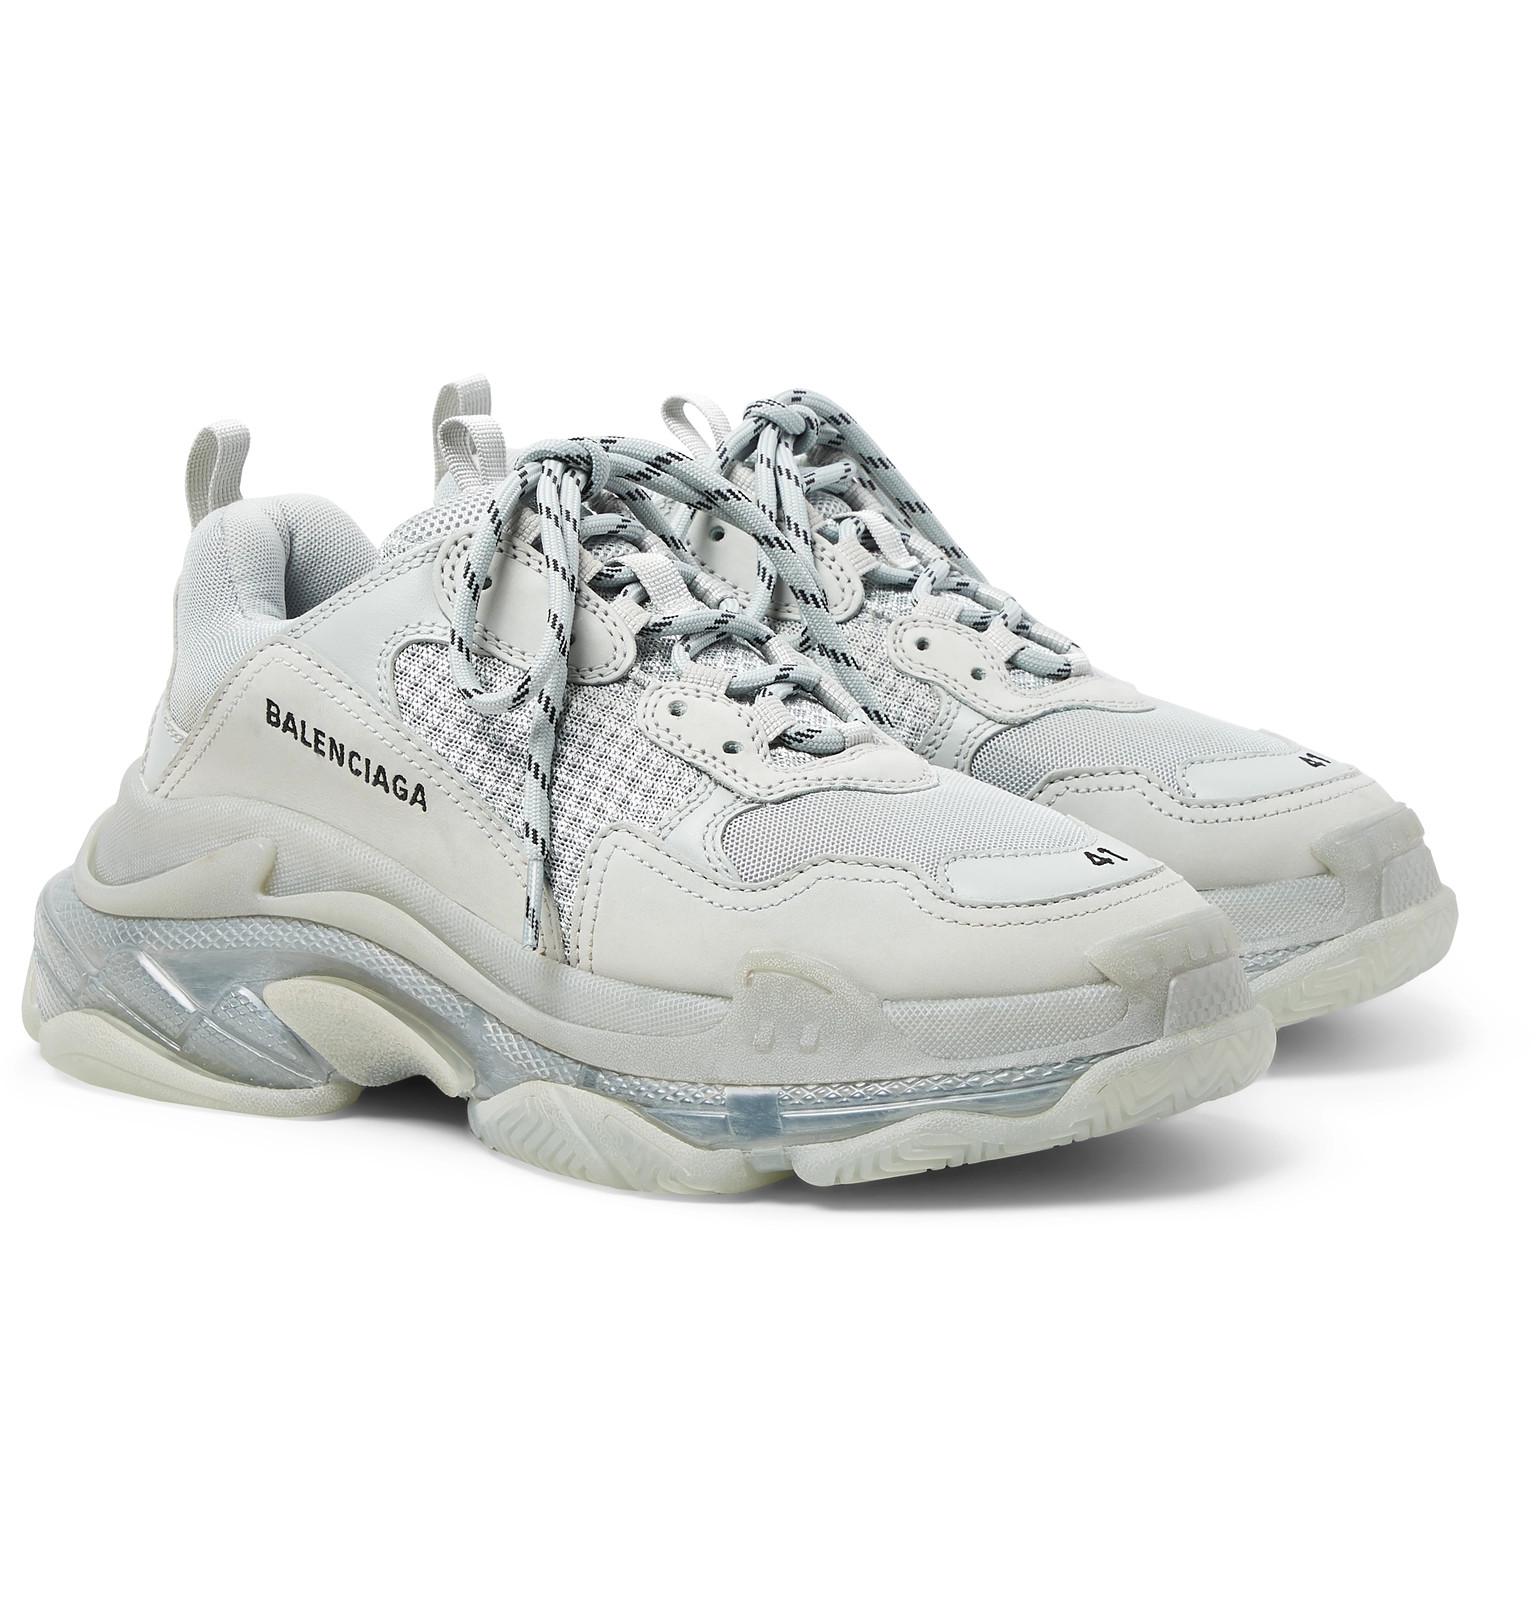 BALENCIAGA  Track Recycled Sole Trainers  Men  Grey 1250  Flannels